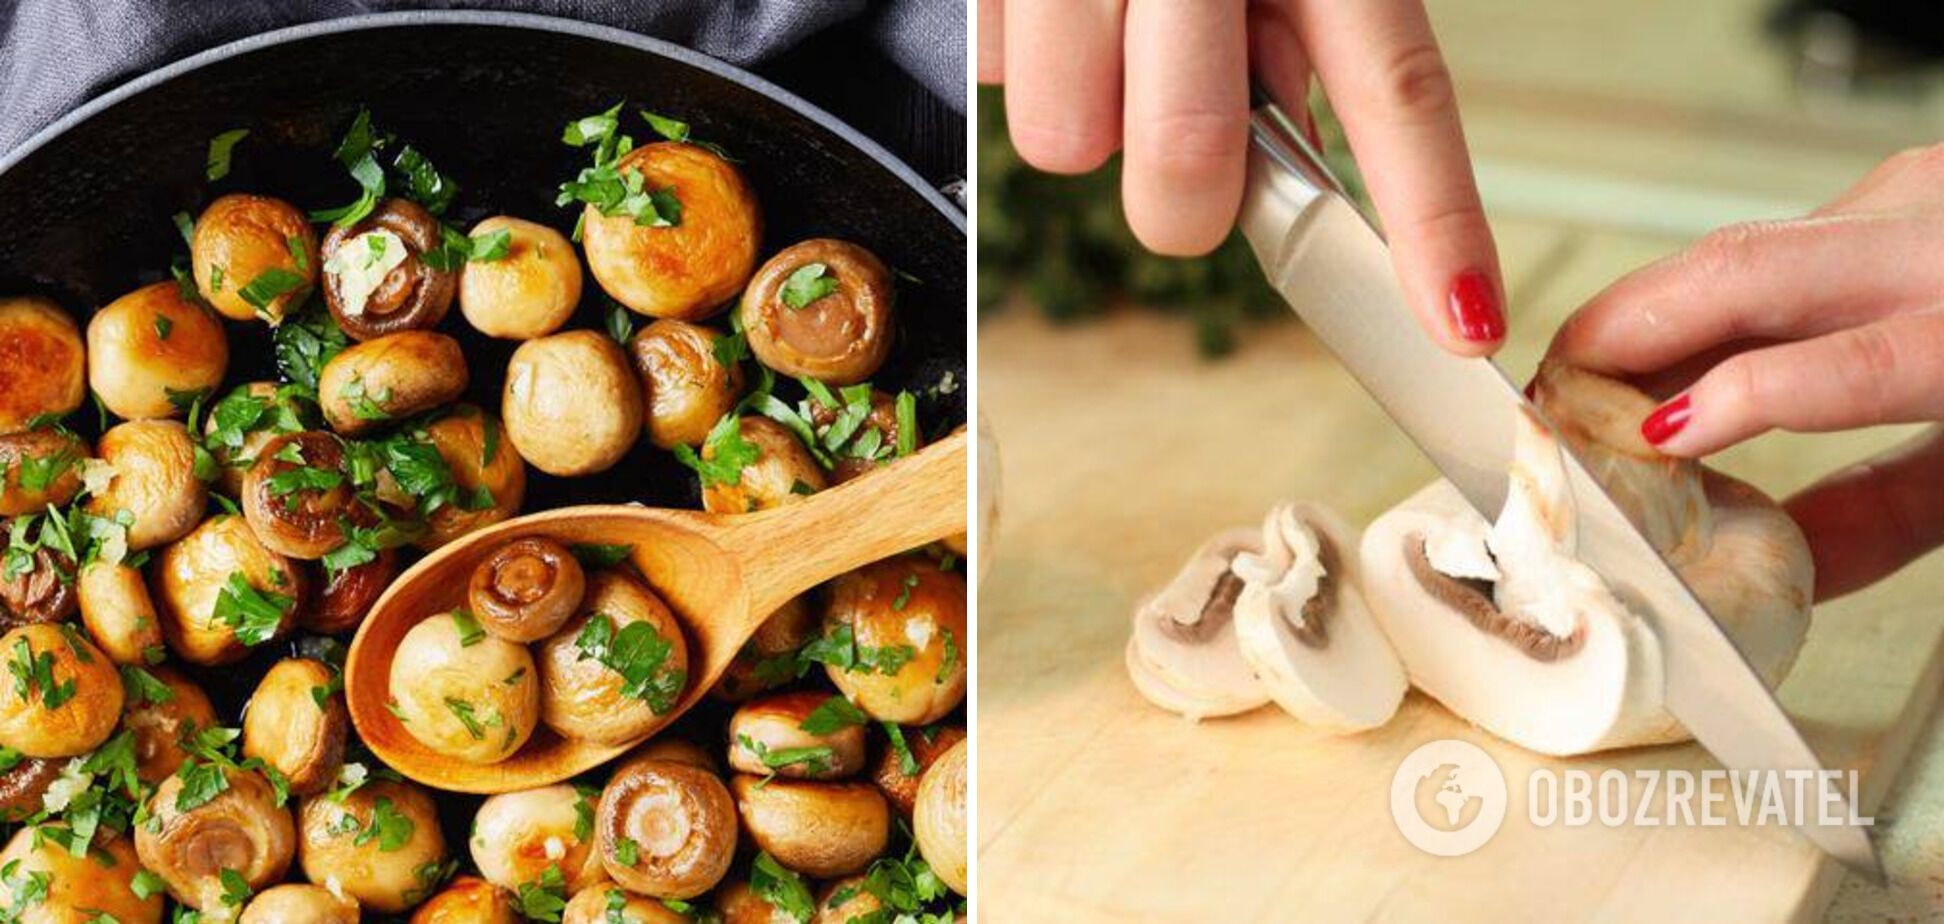 Mushrooms for cooking